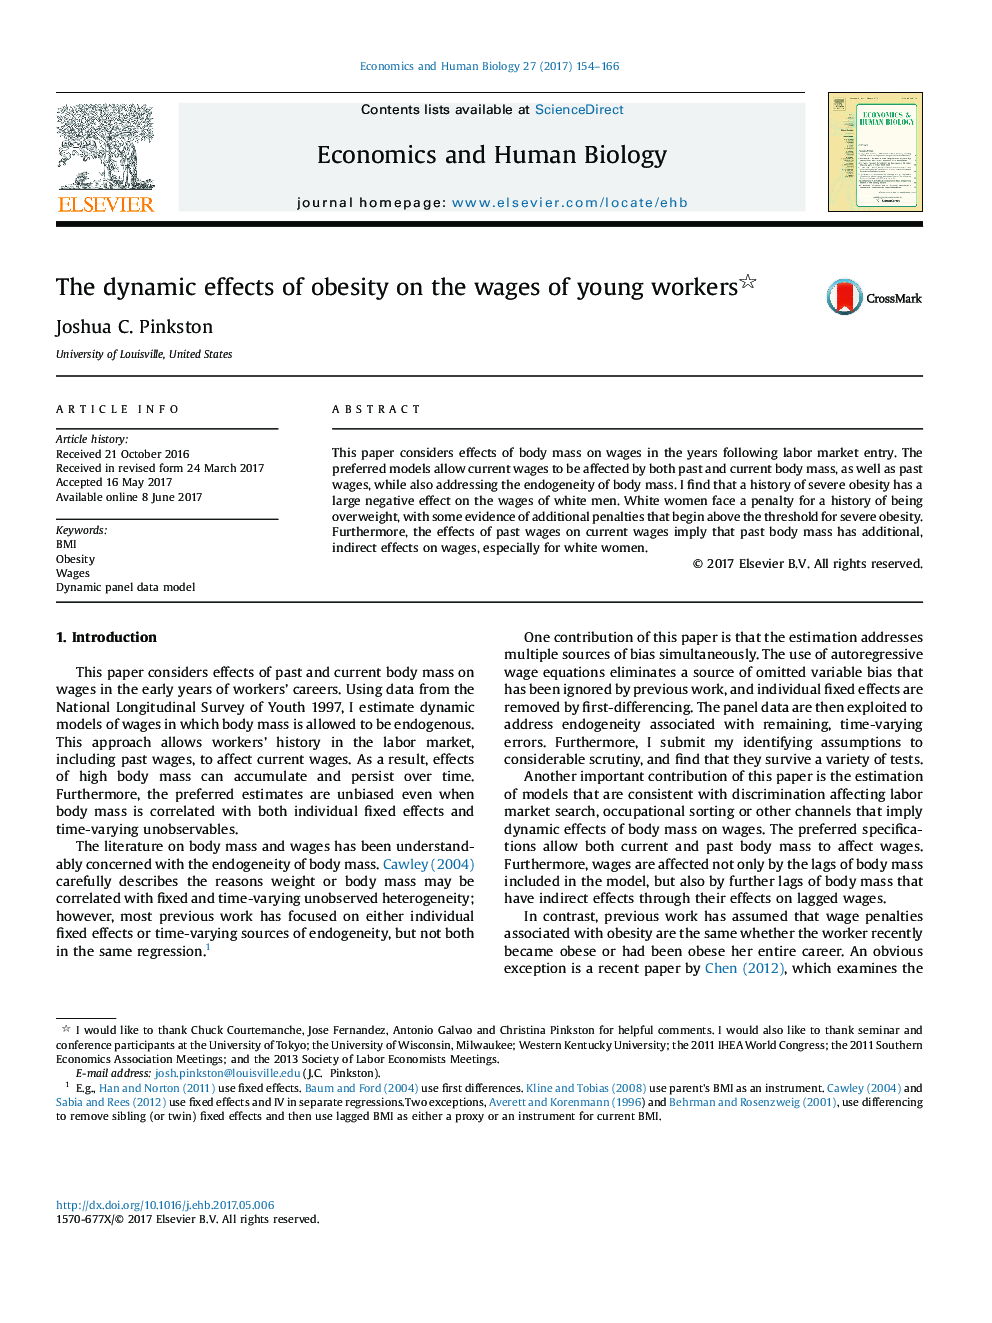 The dynamic effects of obesity on the wages of young workers